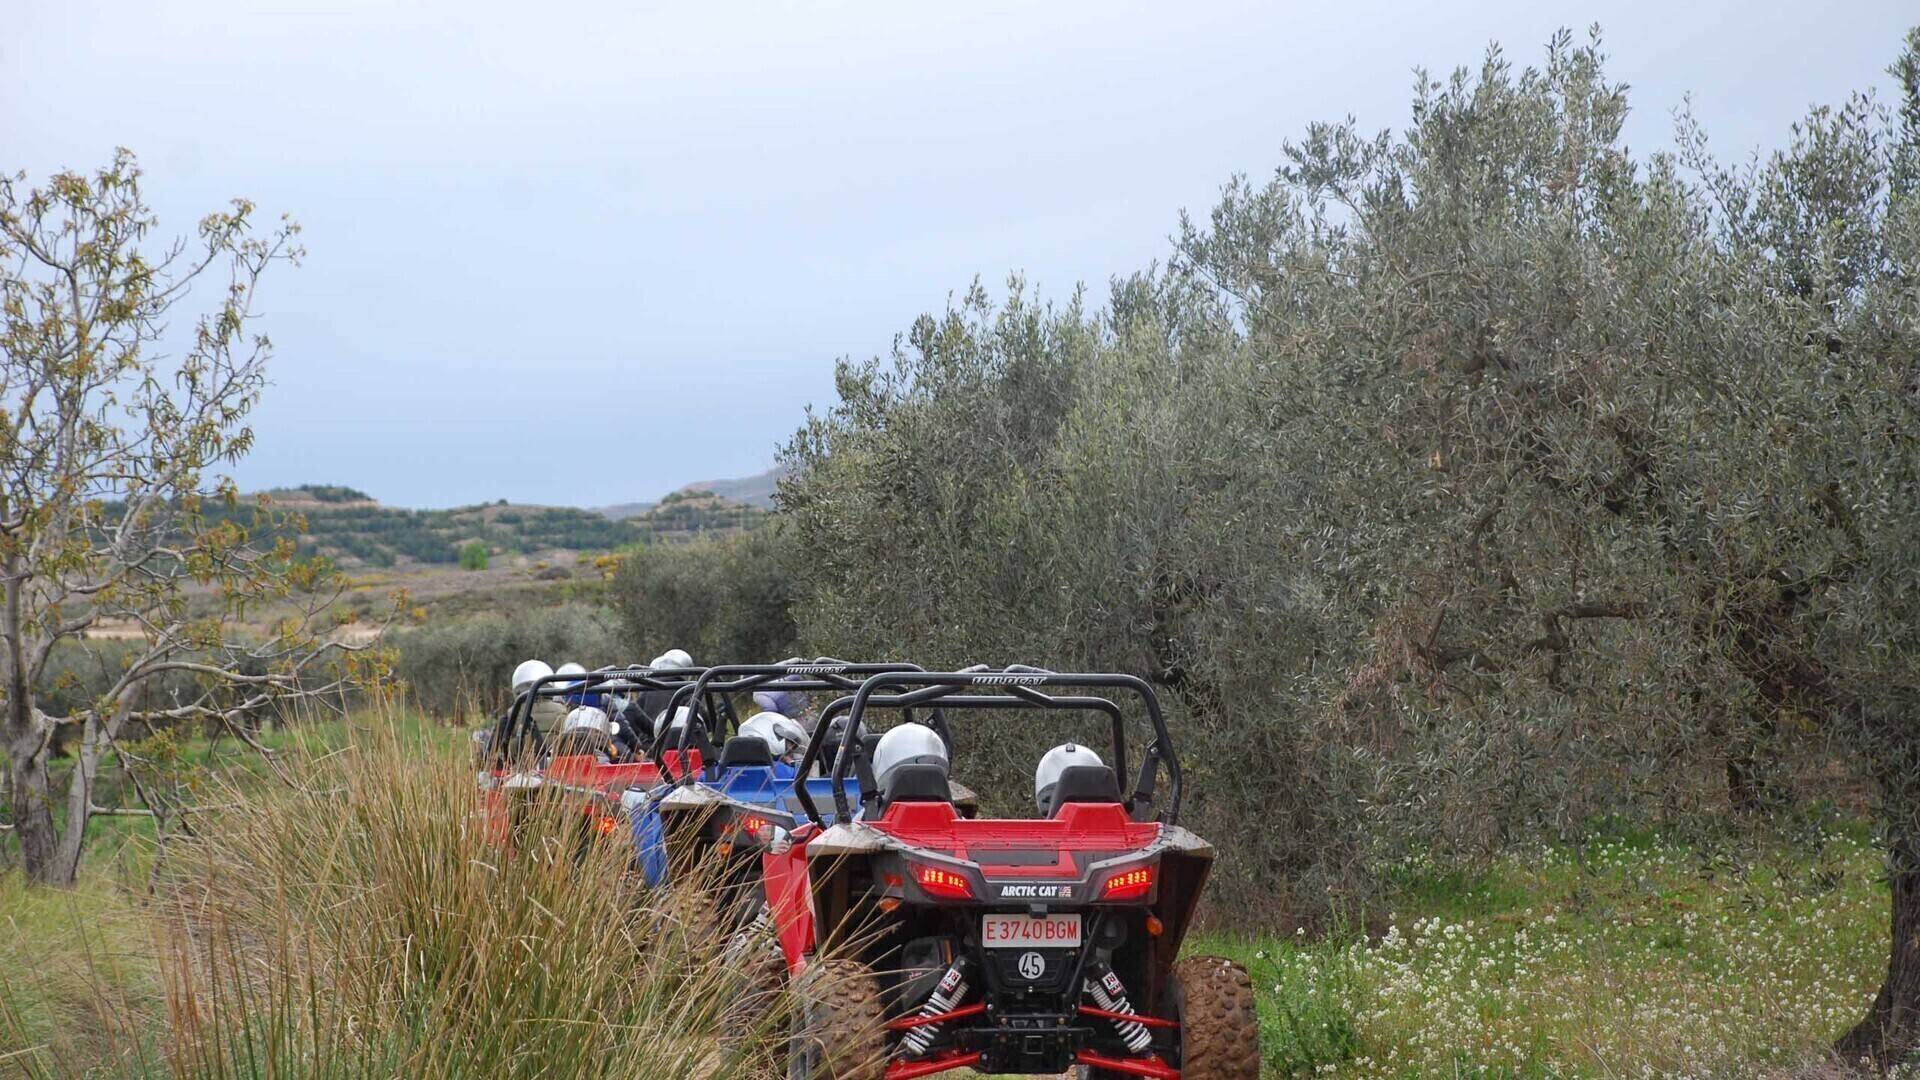 Buggy tour to explore the town of Cascante, the Laguna de Lor reservoir and thousand-year-old olive trees